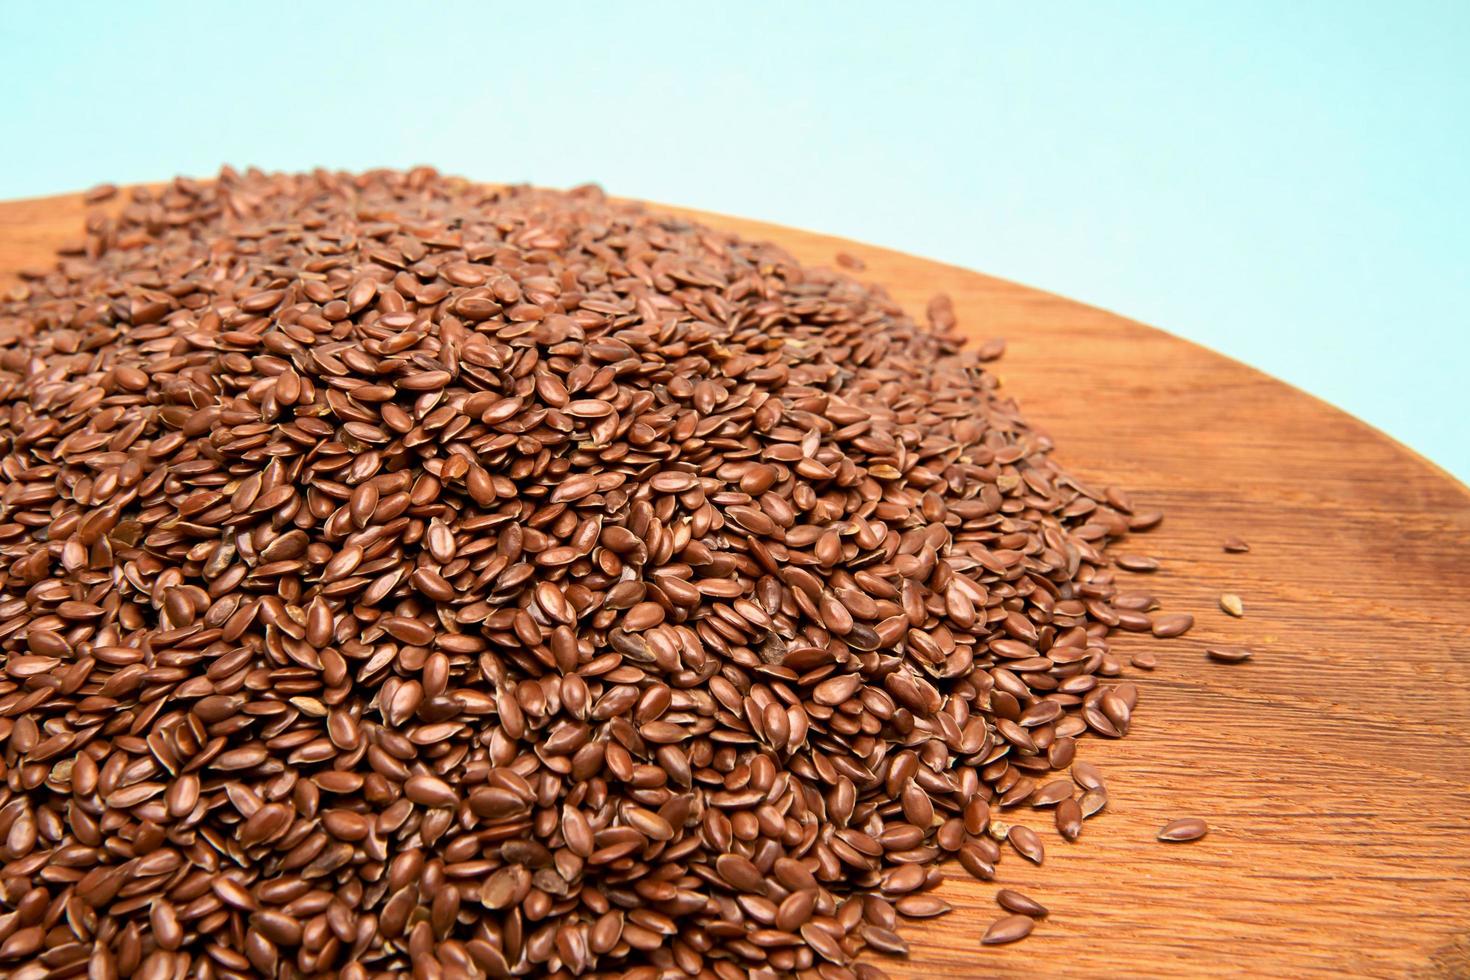 Flax seeds in a pile on a wooden tray. Healthy food concept photo